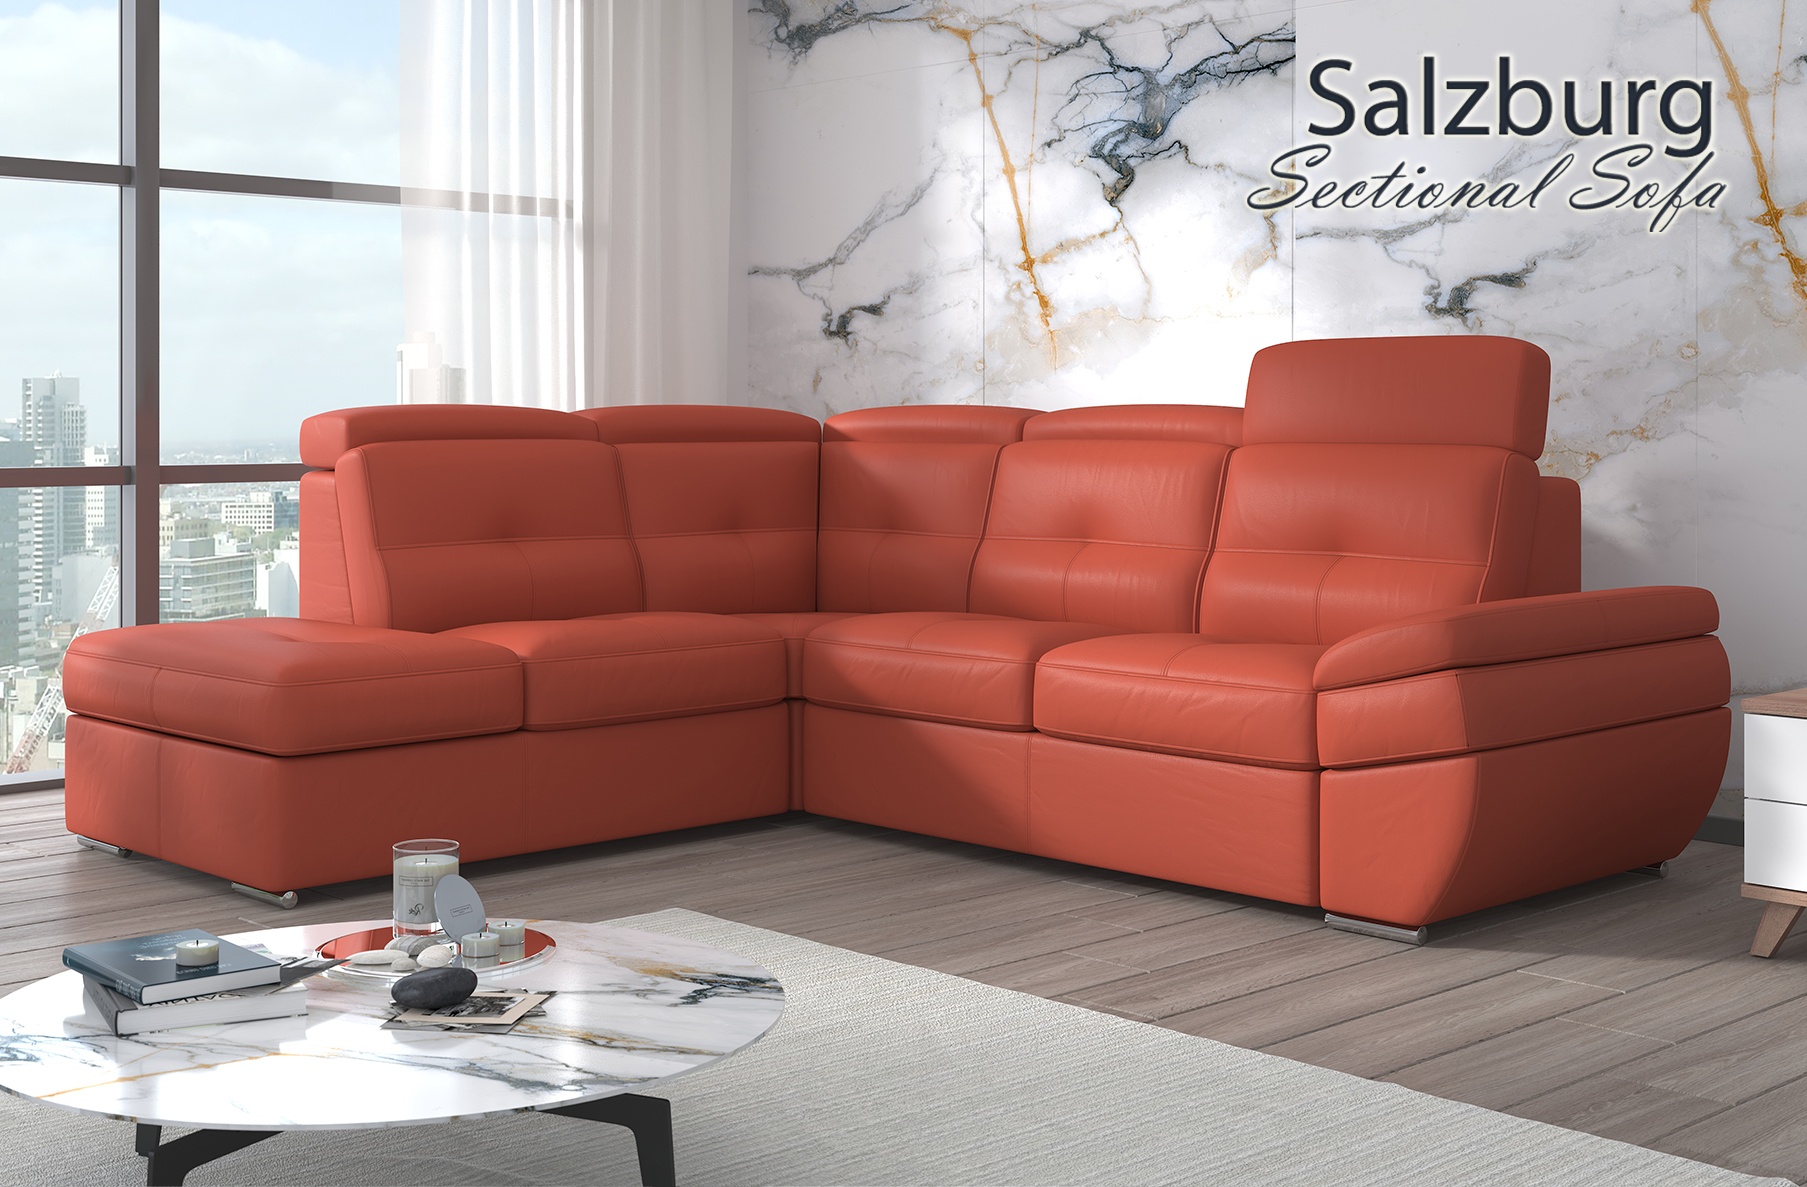 Salzburg Open Chaise Sectional with bed and storage, Cheap